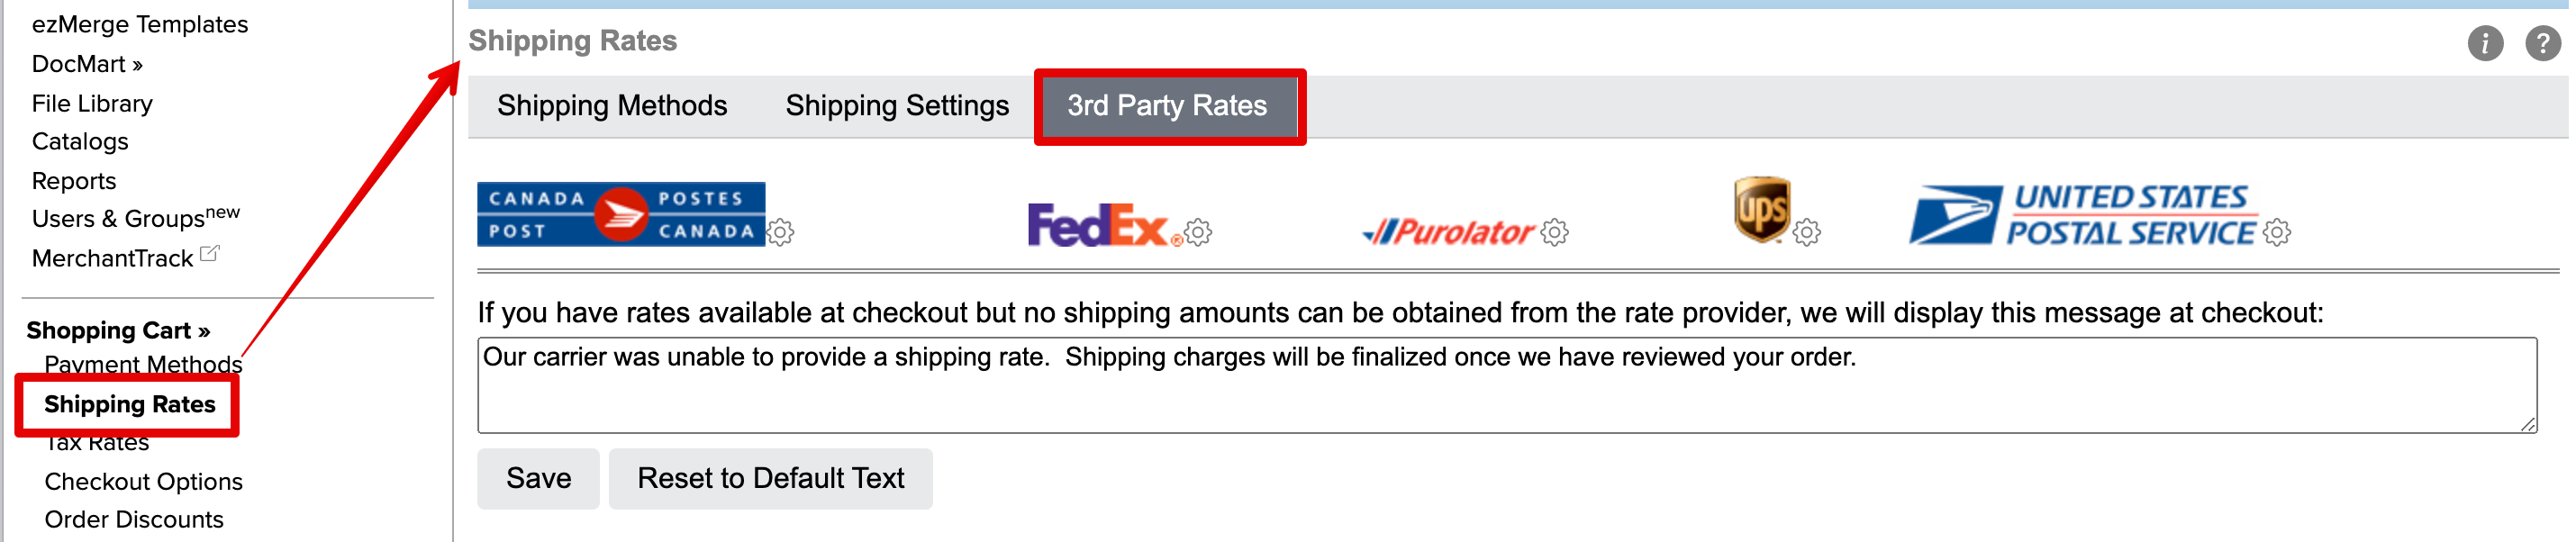 Shipping_Rates_2021-04-29_08-34-41.png